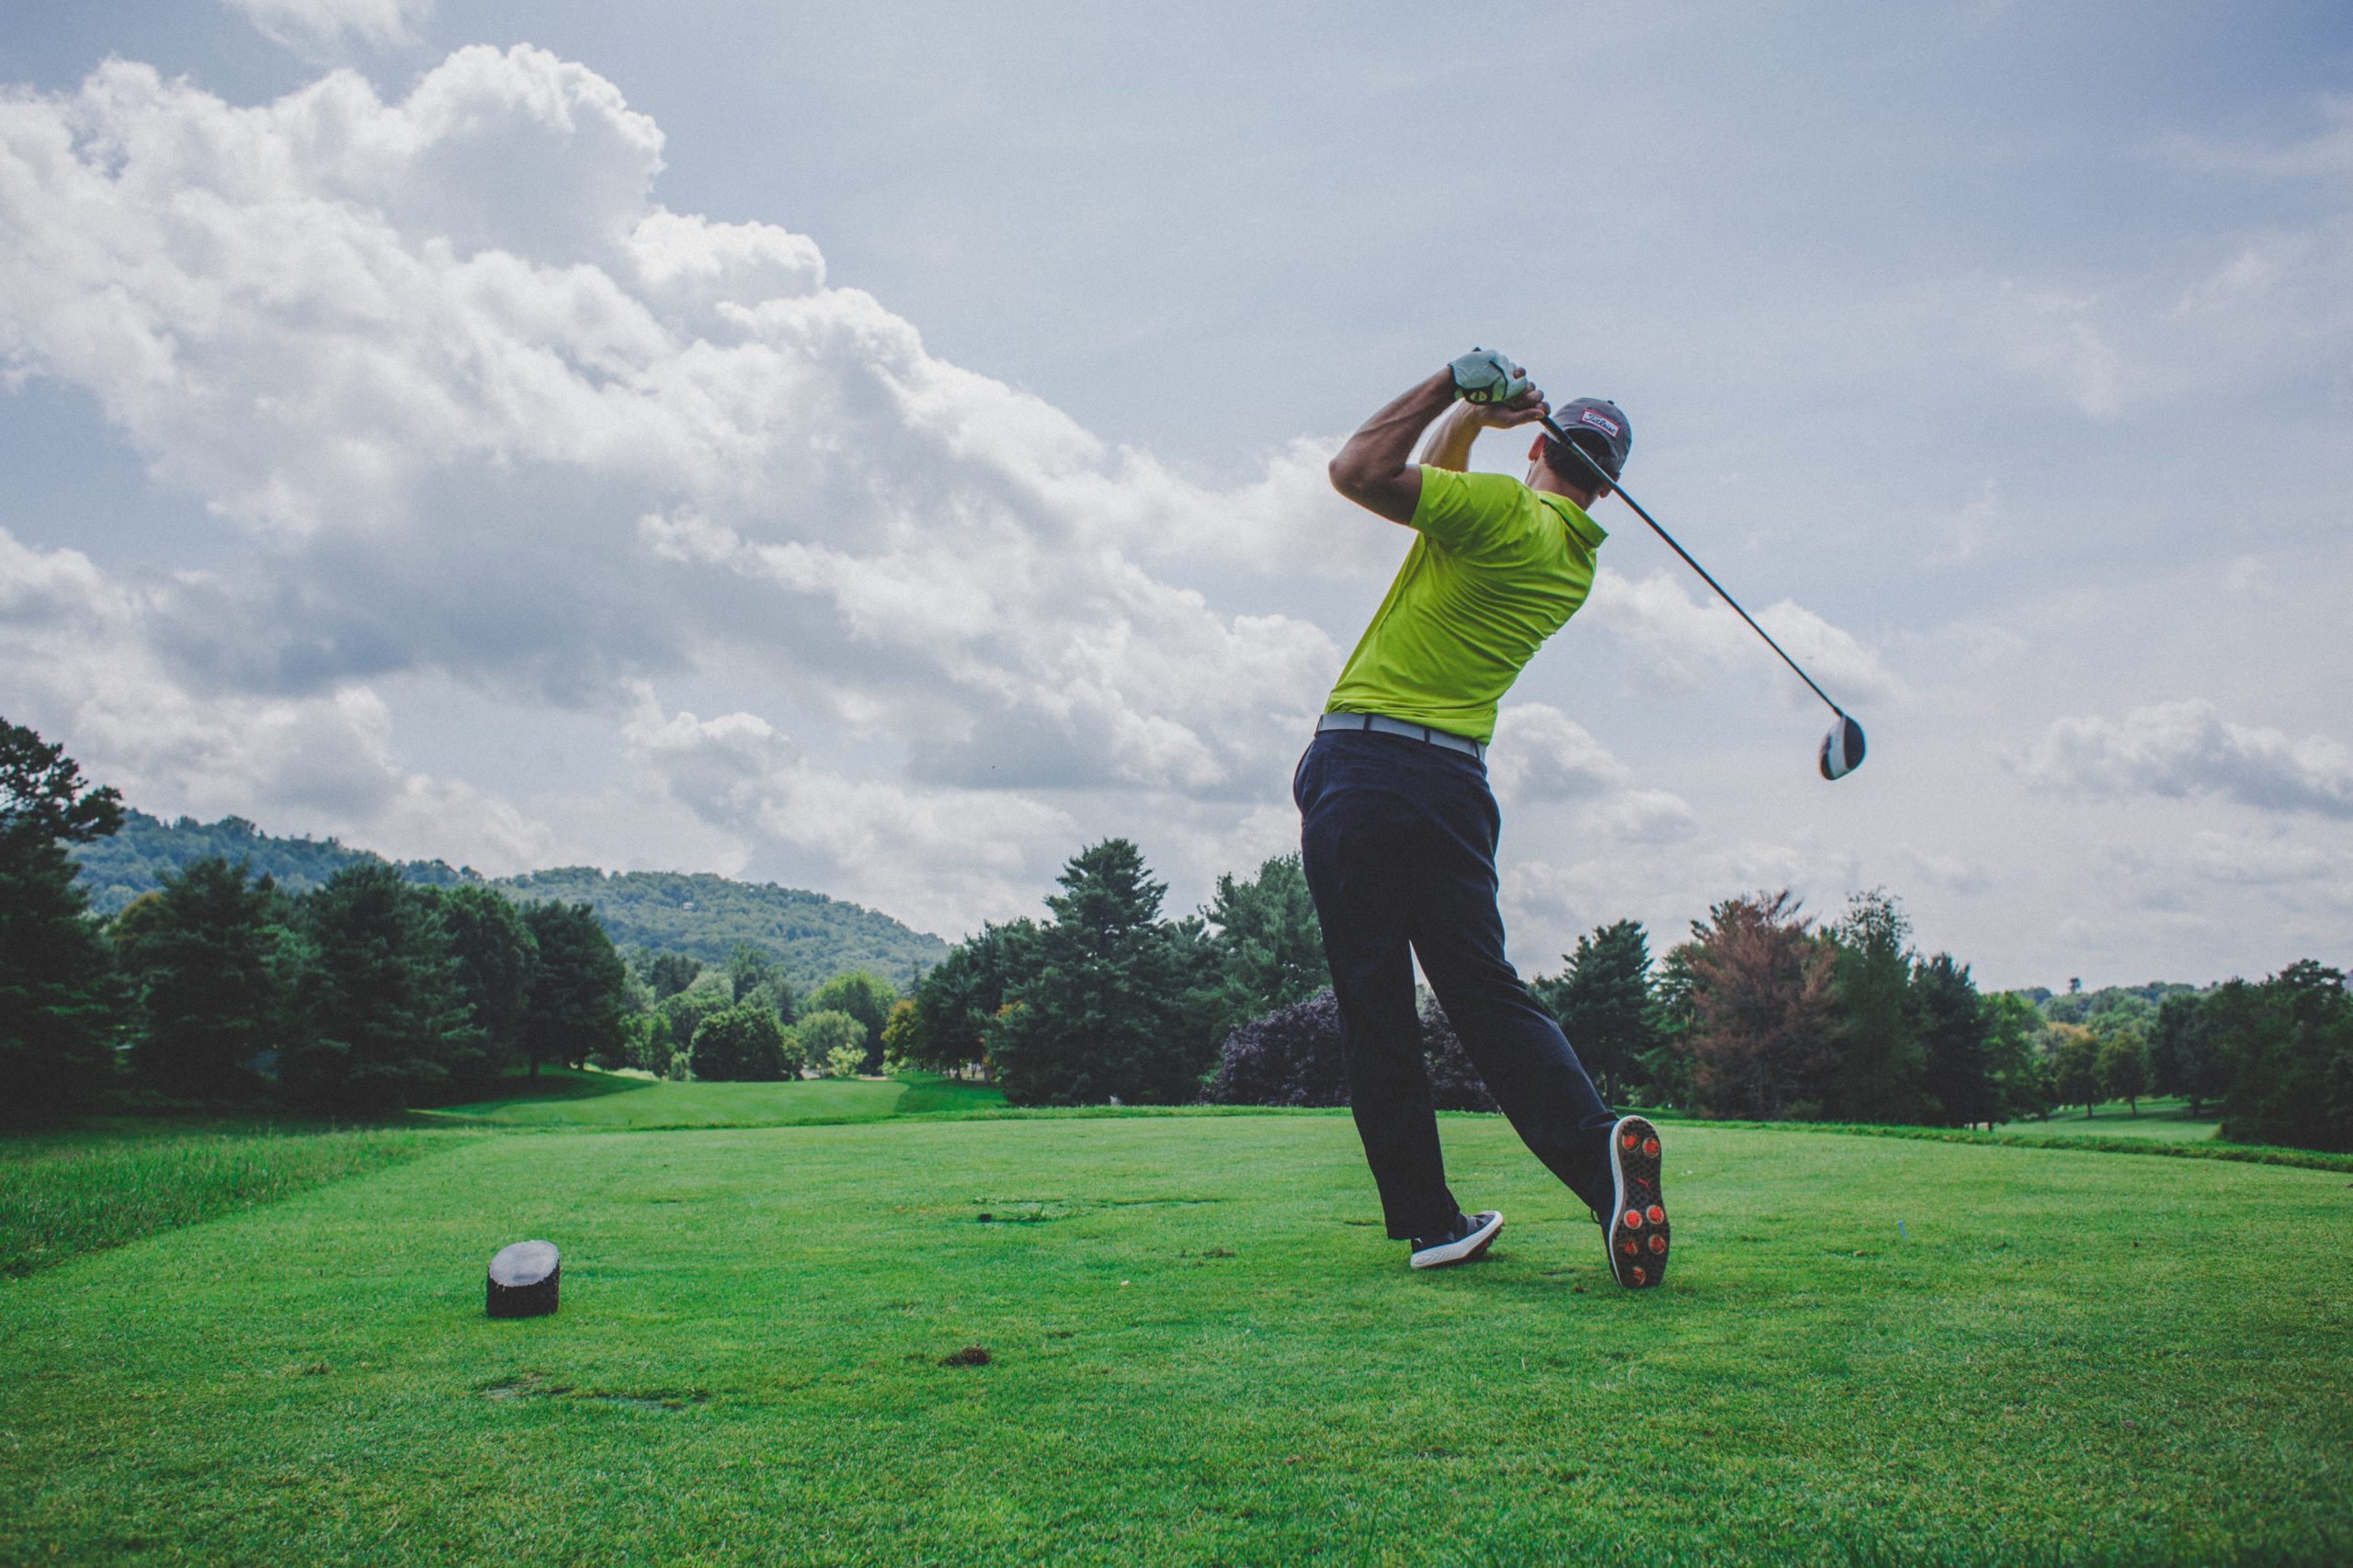 5 Golfing Tips That Will Make You a Better Golfer